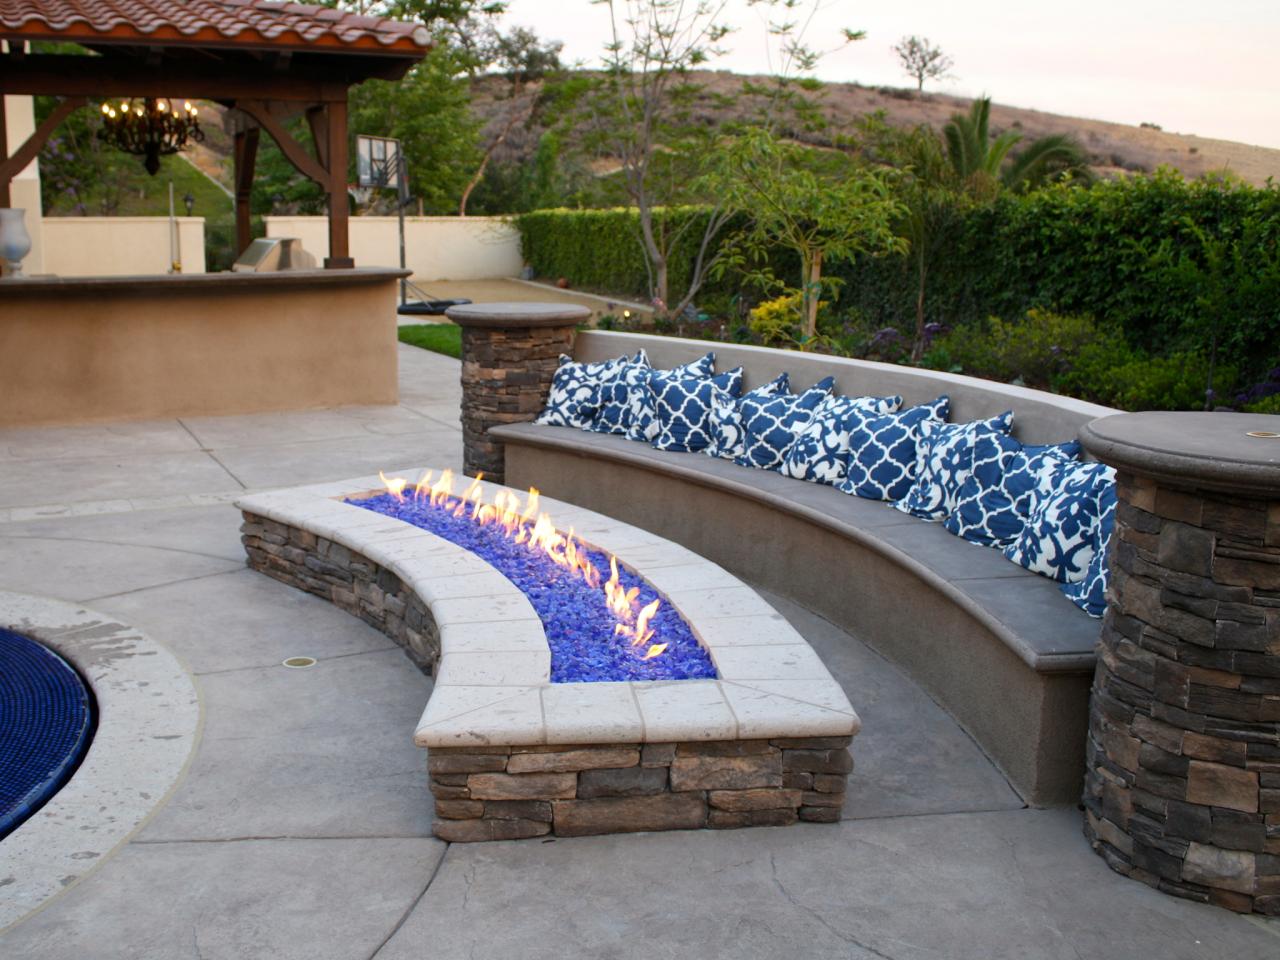 Designing A Patio Around Fire Pit Diy, Outdoor Gas Fire Pit Stone